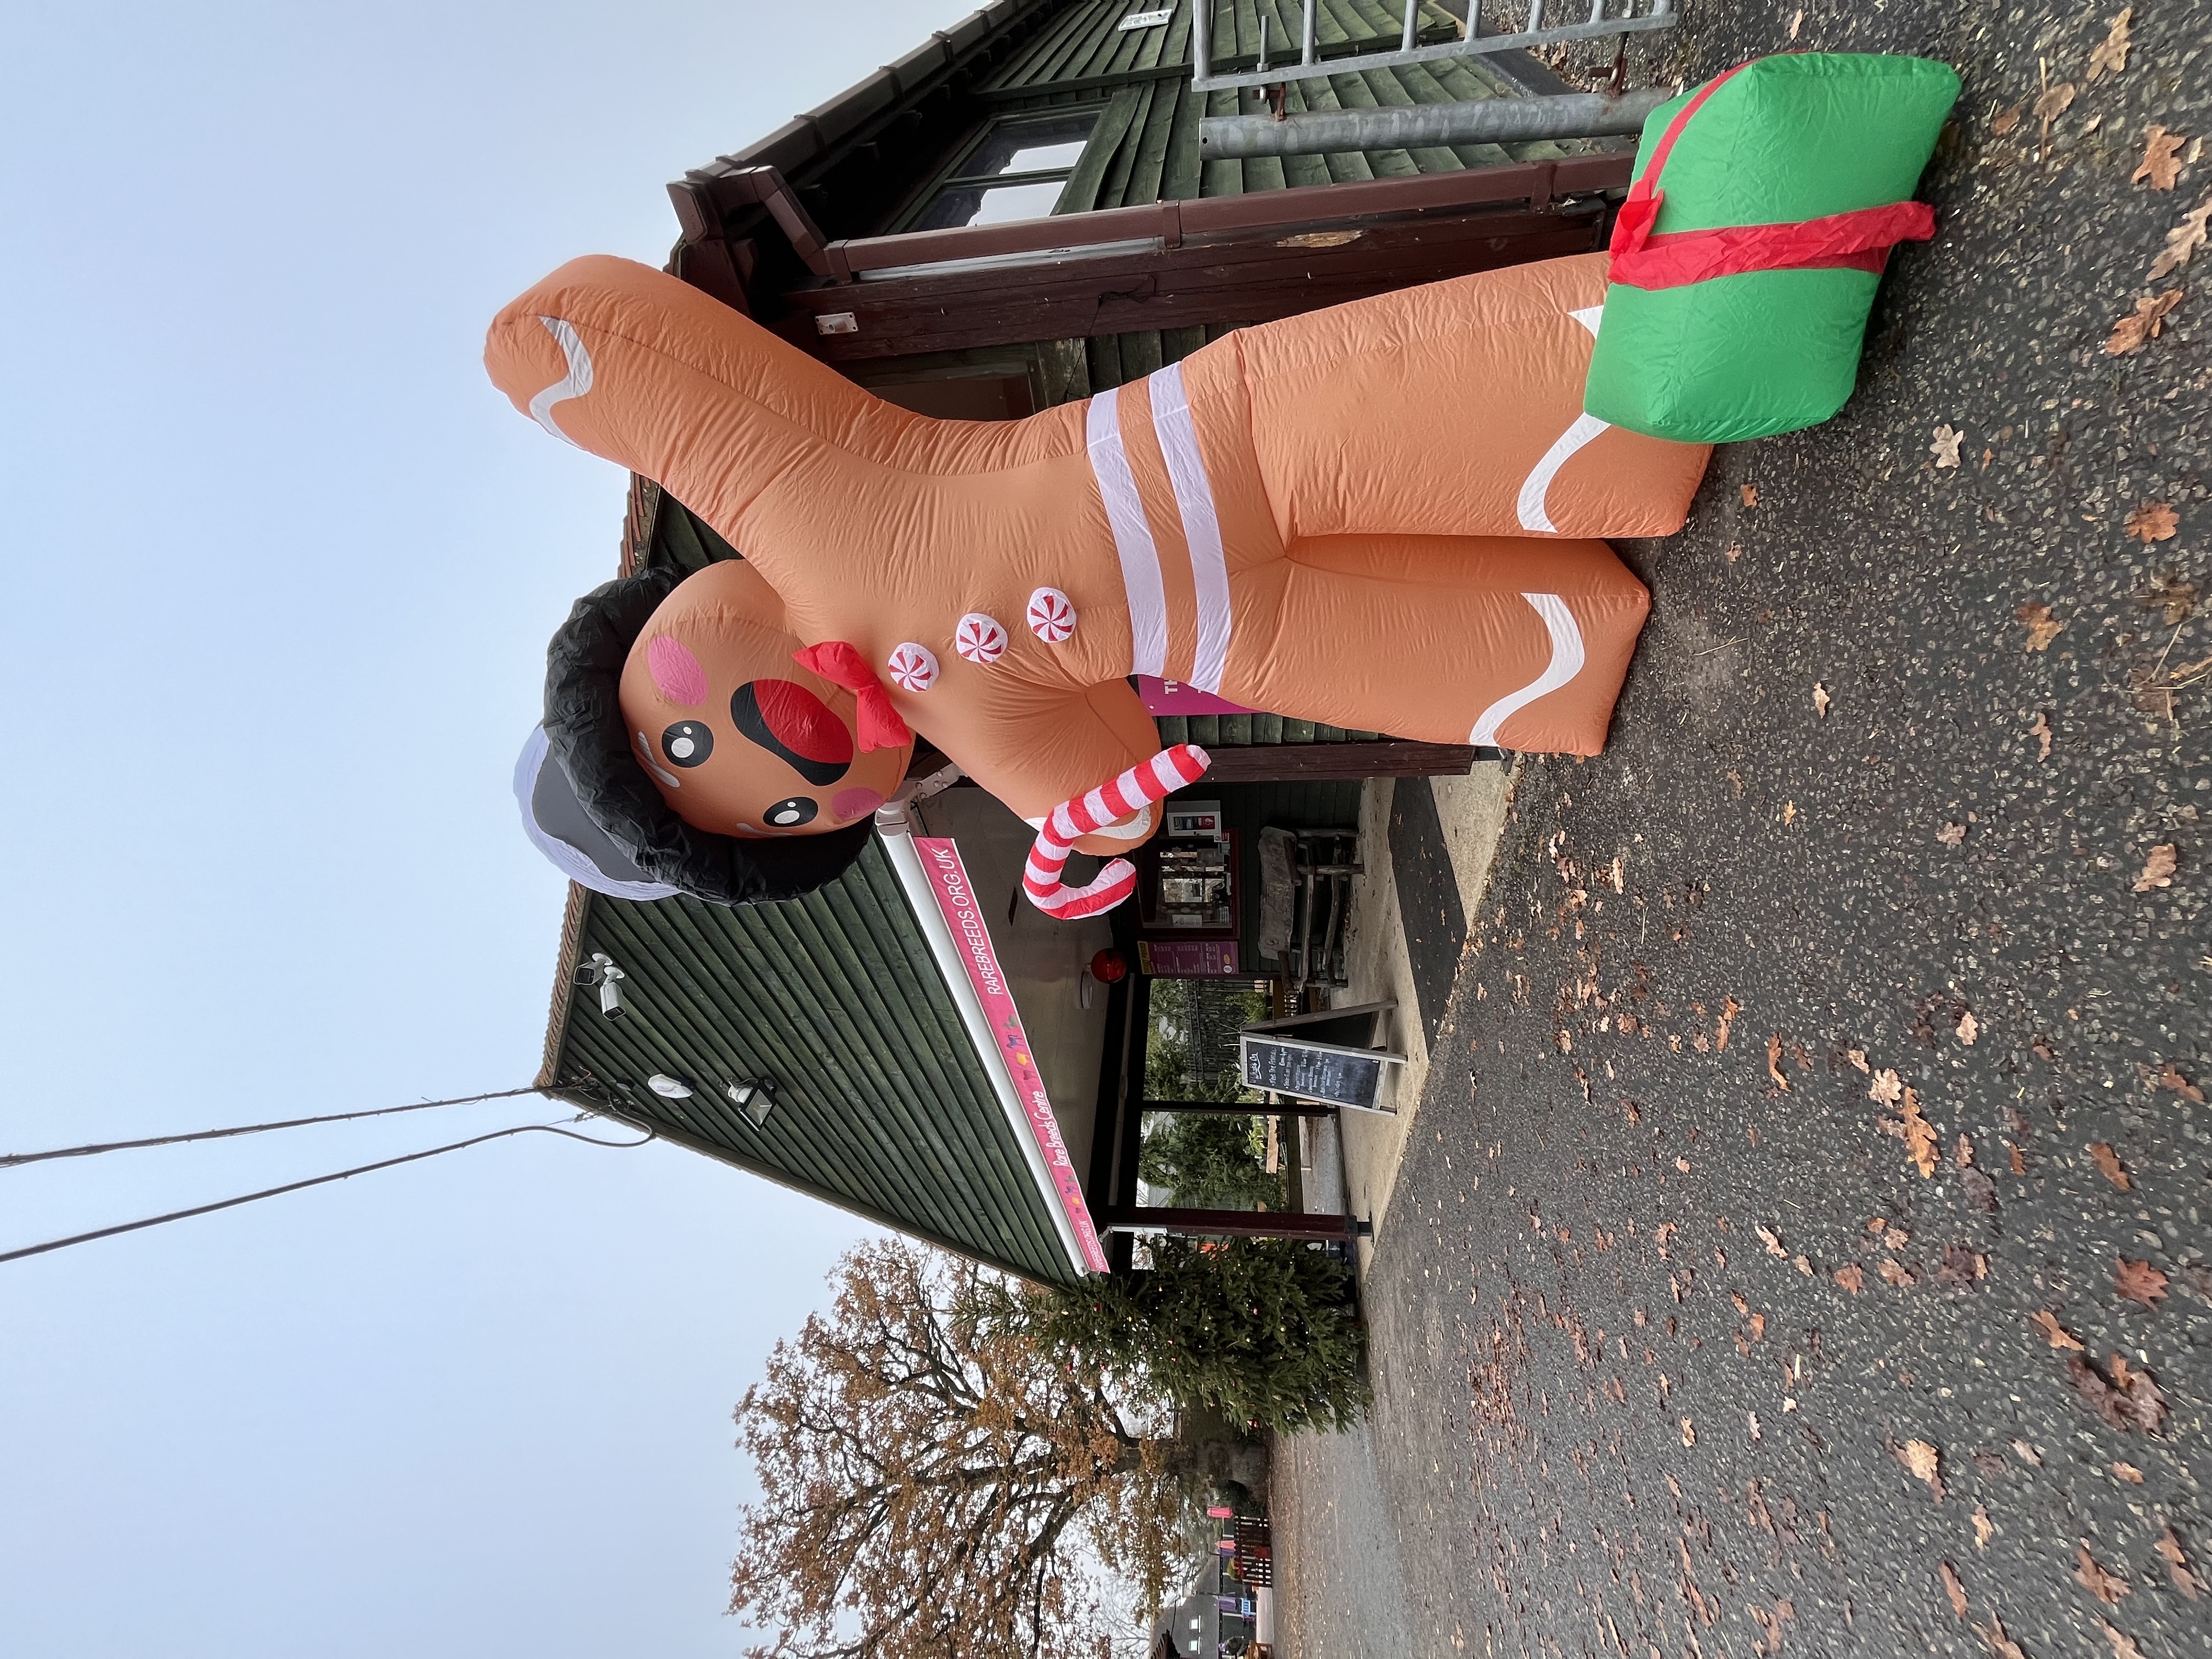 A huge Gingerbread man welcomed us to the Rare Breeds